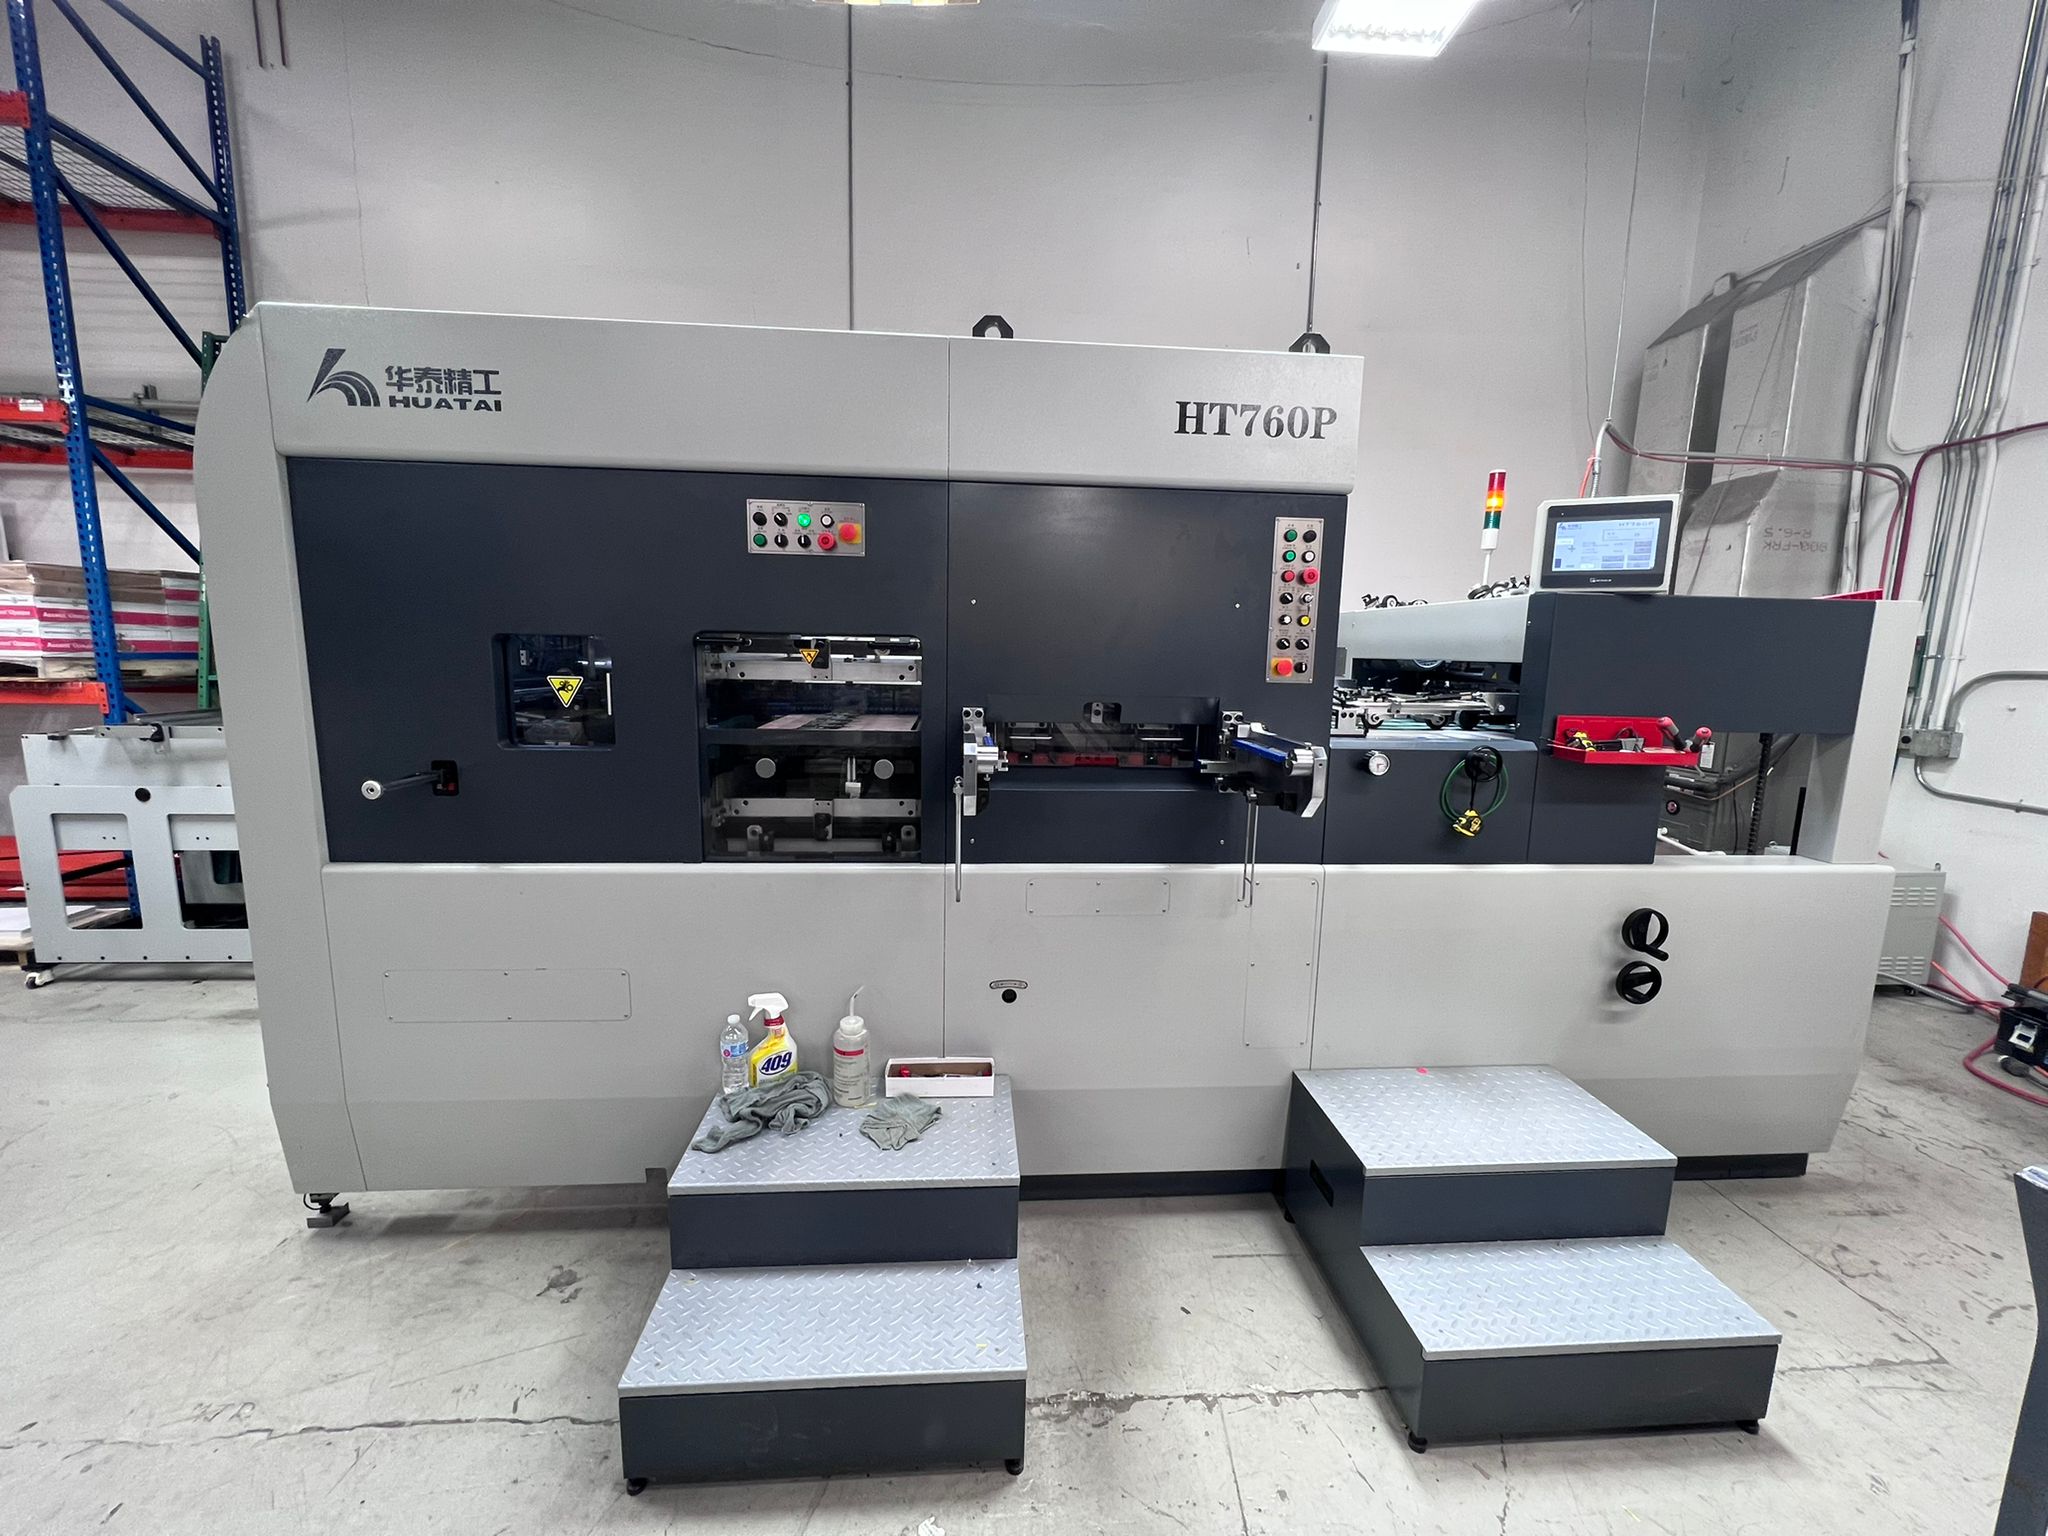 Successful installation by The Royo Machinery Team - Die Cutter Royo Machinery RHT-760P